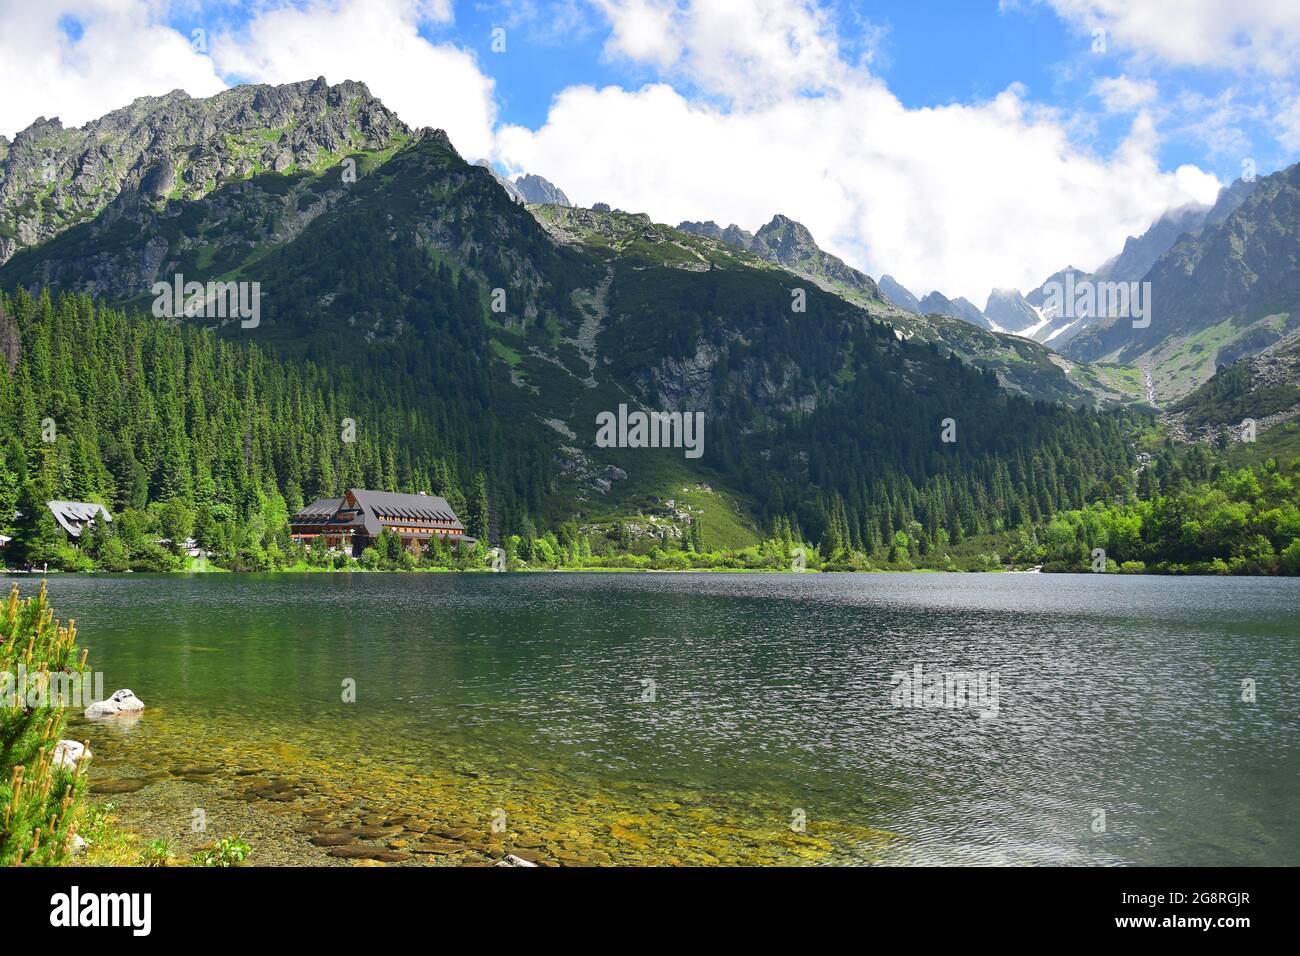 The beautiful lake Popradske pleso, surrounded by the Tatra mountains, and a mountain hotel. Slovakia. Image taken from public ground. Stock Photo